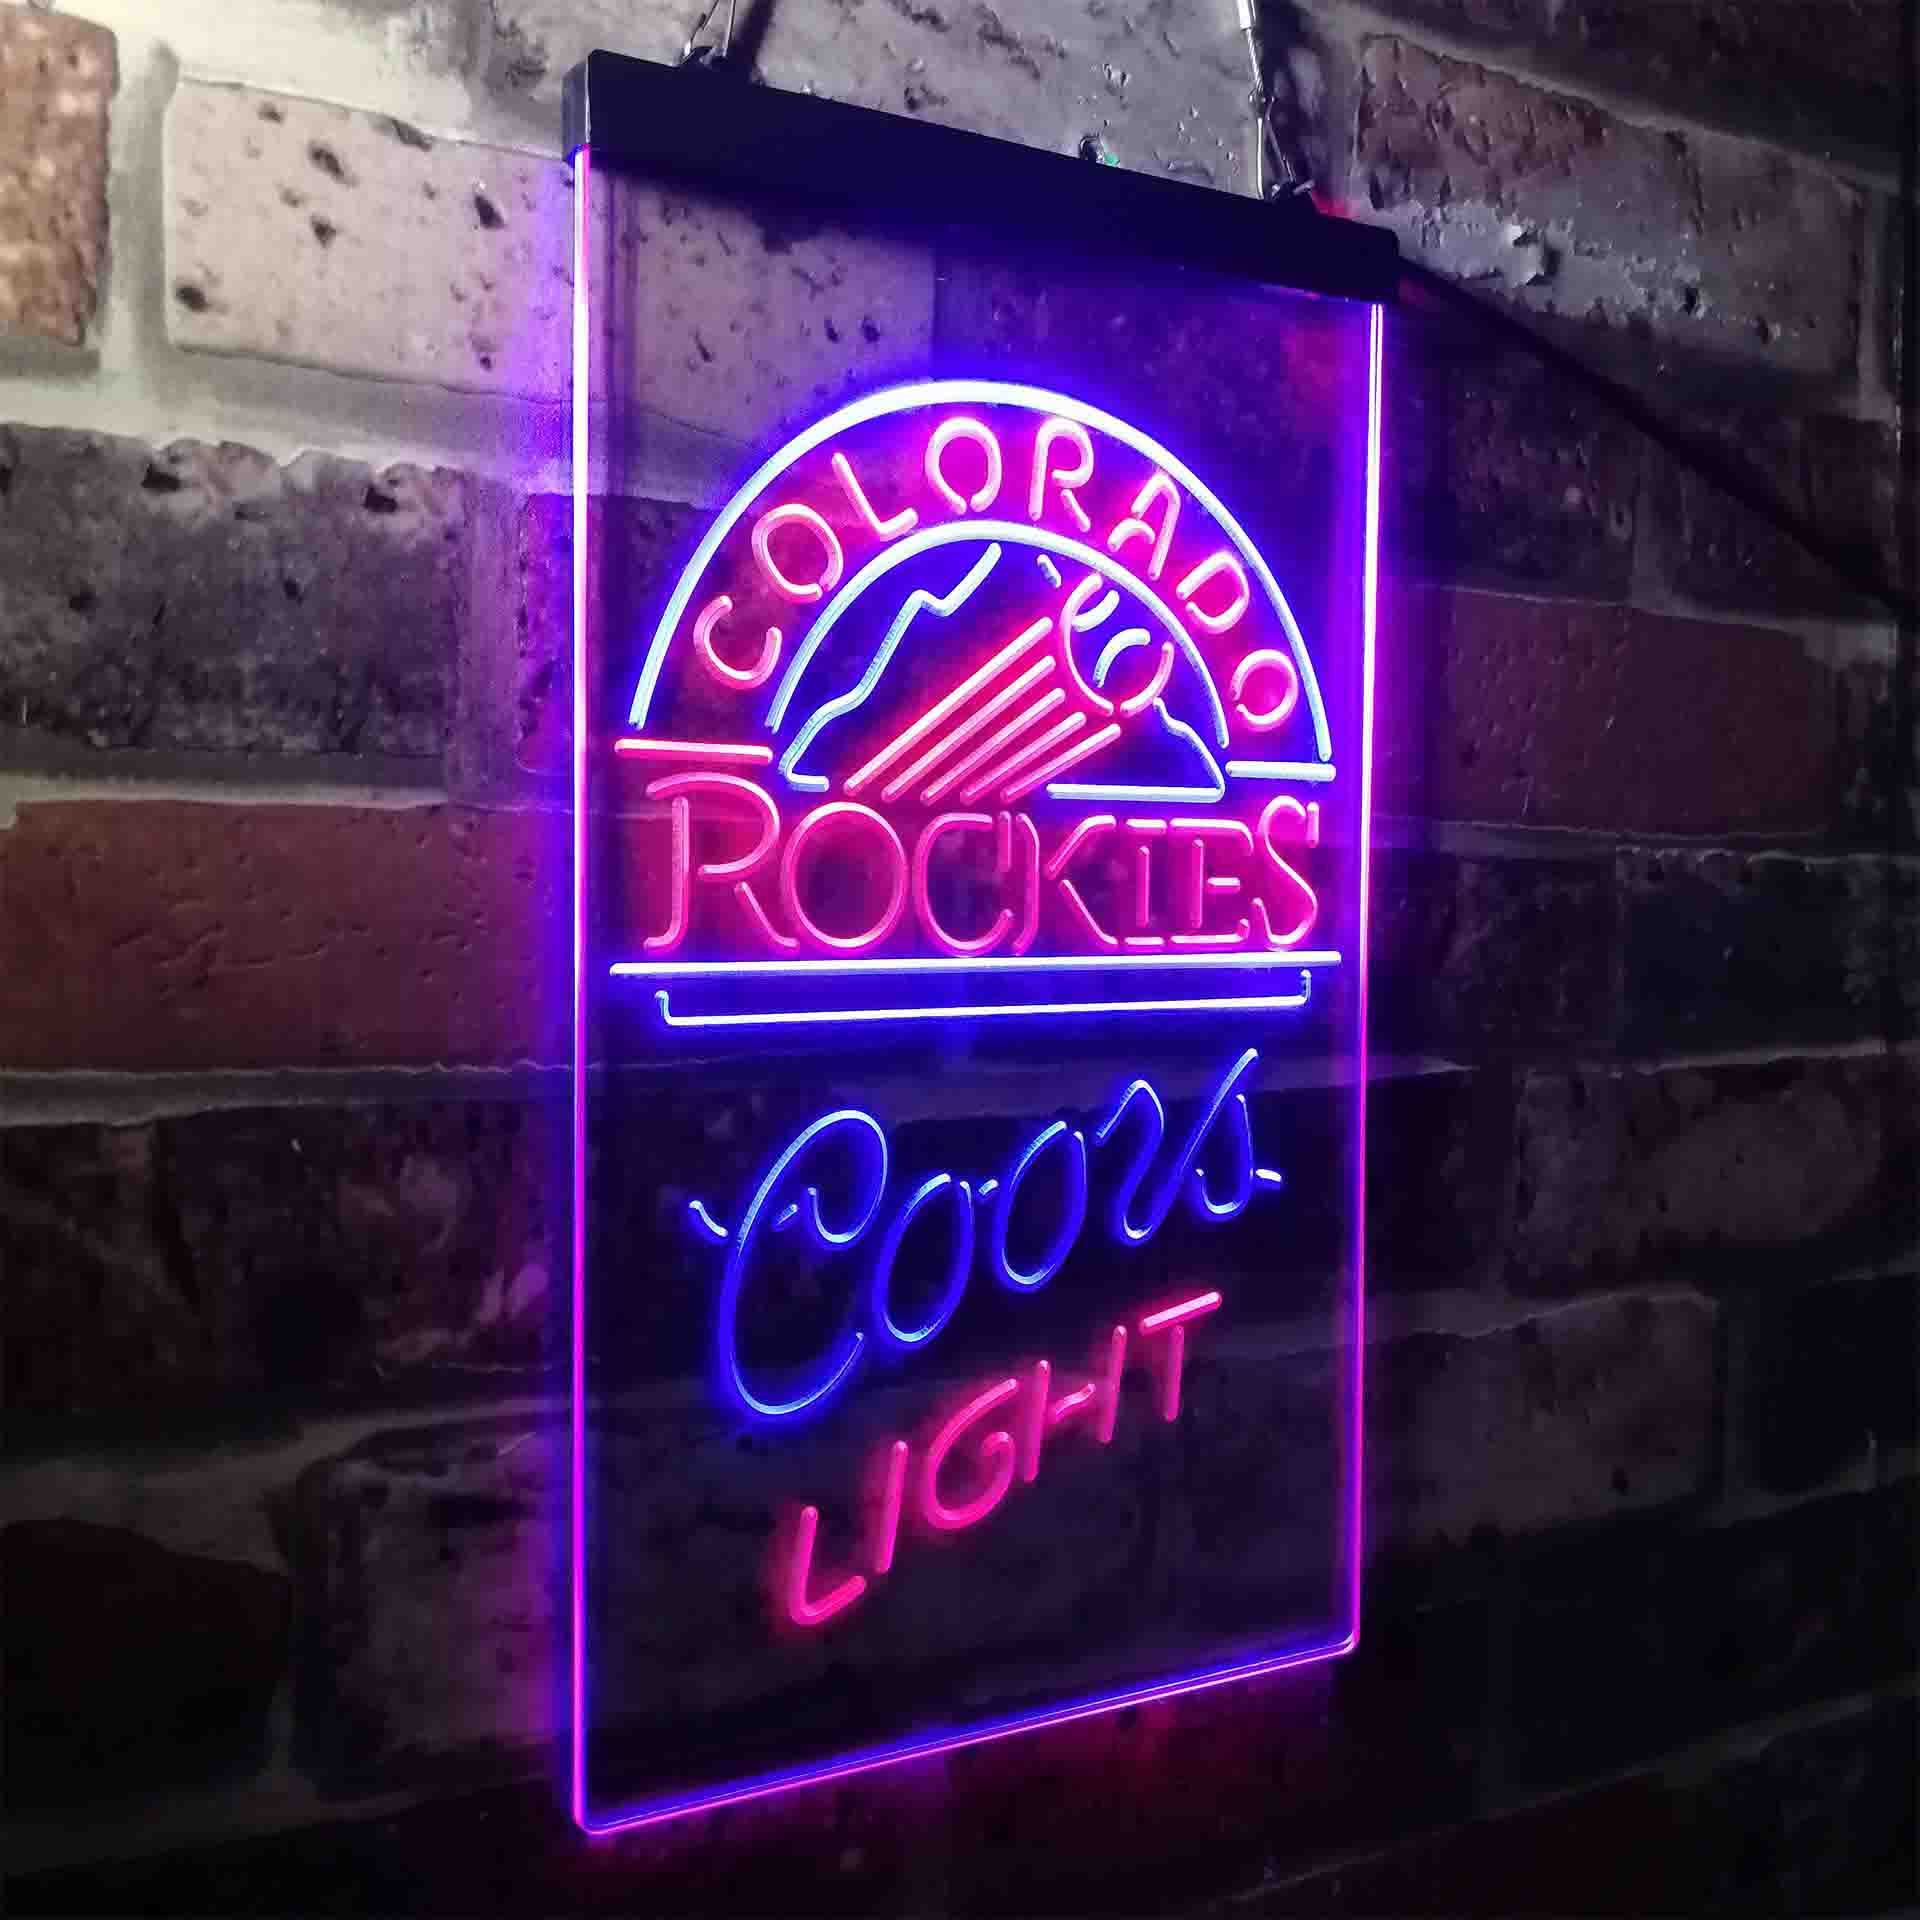 Colorado Rockies Coors Light LED Neon Sign